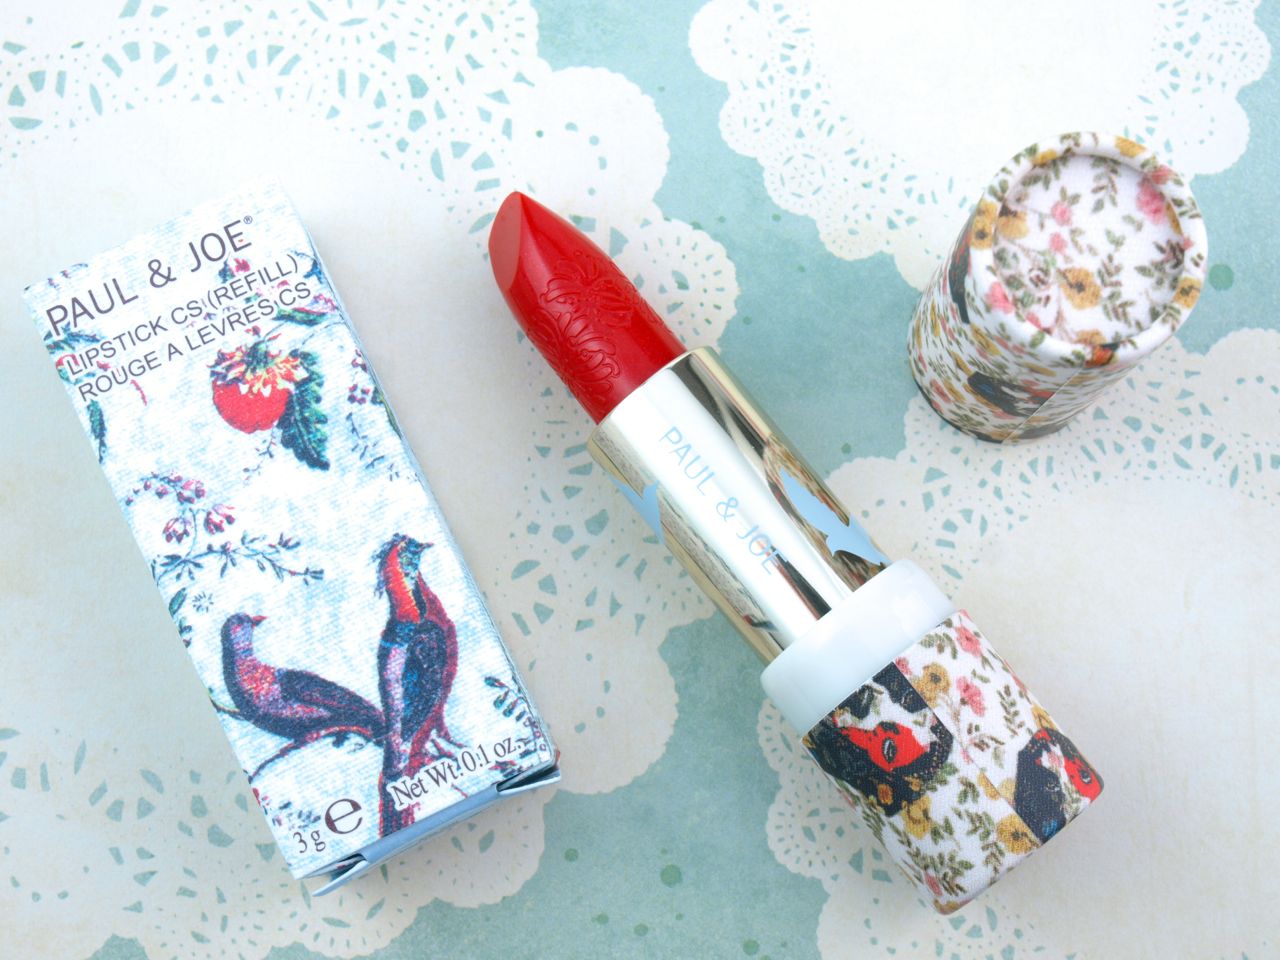 Paul & Joe Sparkles Collection Lipstick Case 019 & Lipstick Refill 086: Review and Swatches